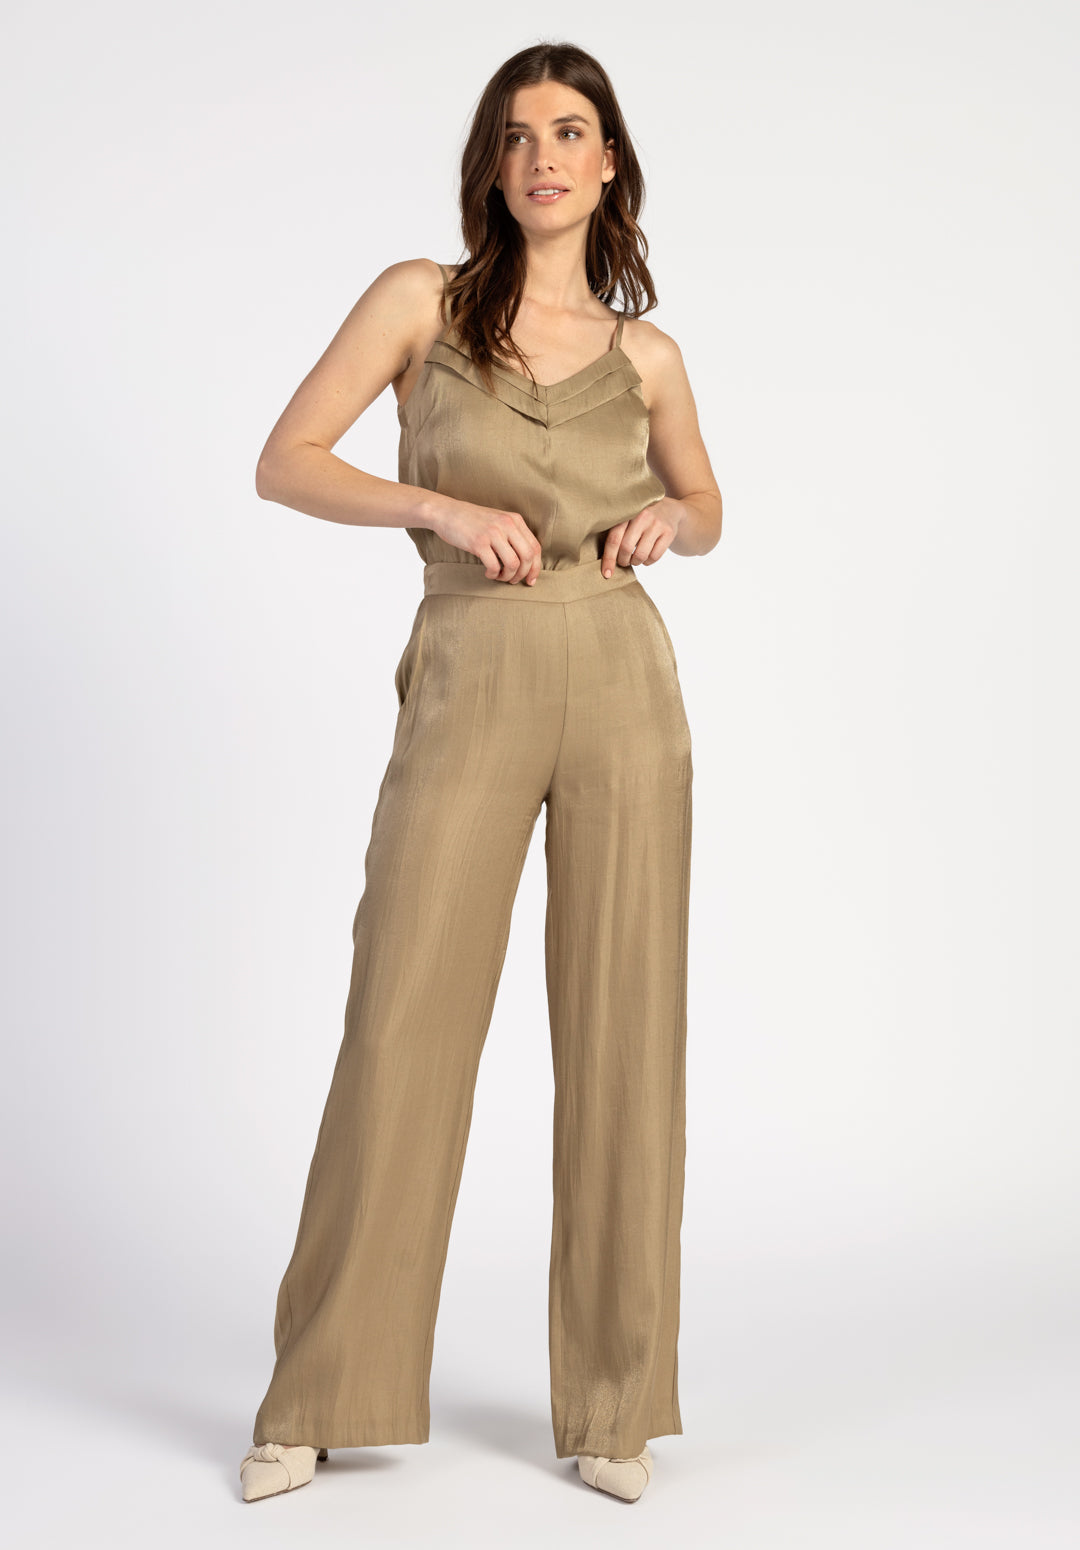 Searle Shimmery Pants Olive